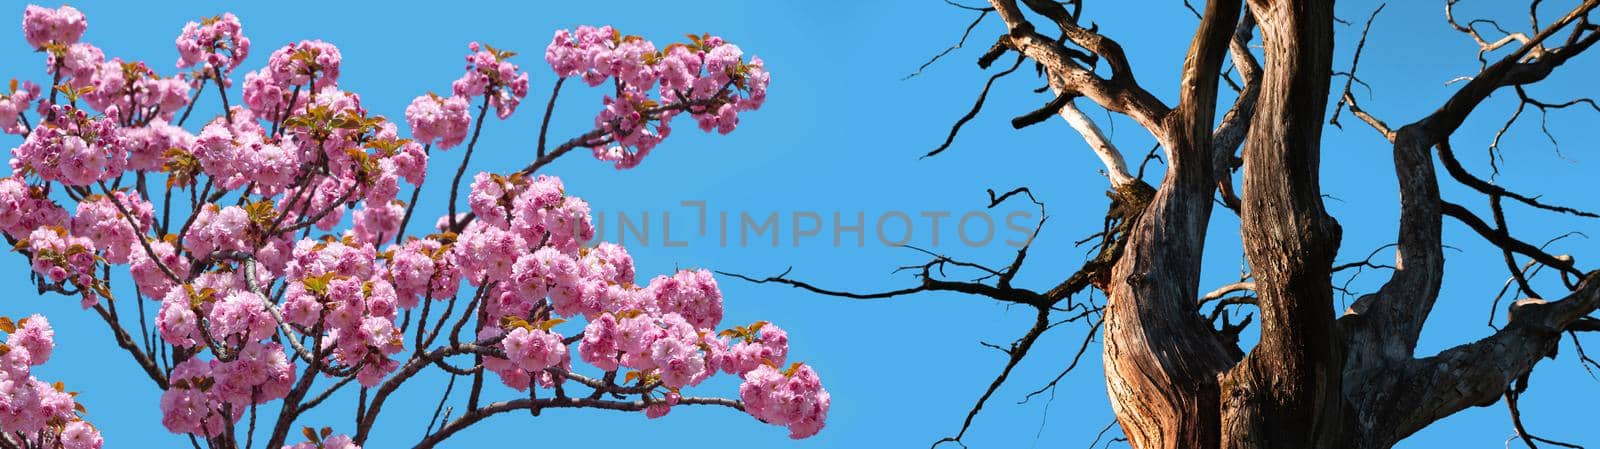 Life and death concept. Blooming sakura tree and an old dried tree against a blue sky